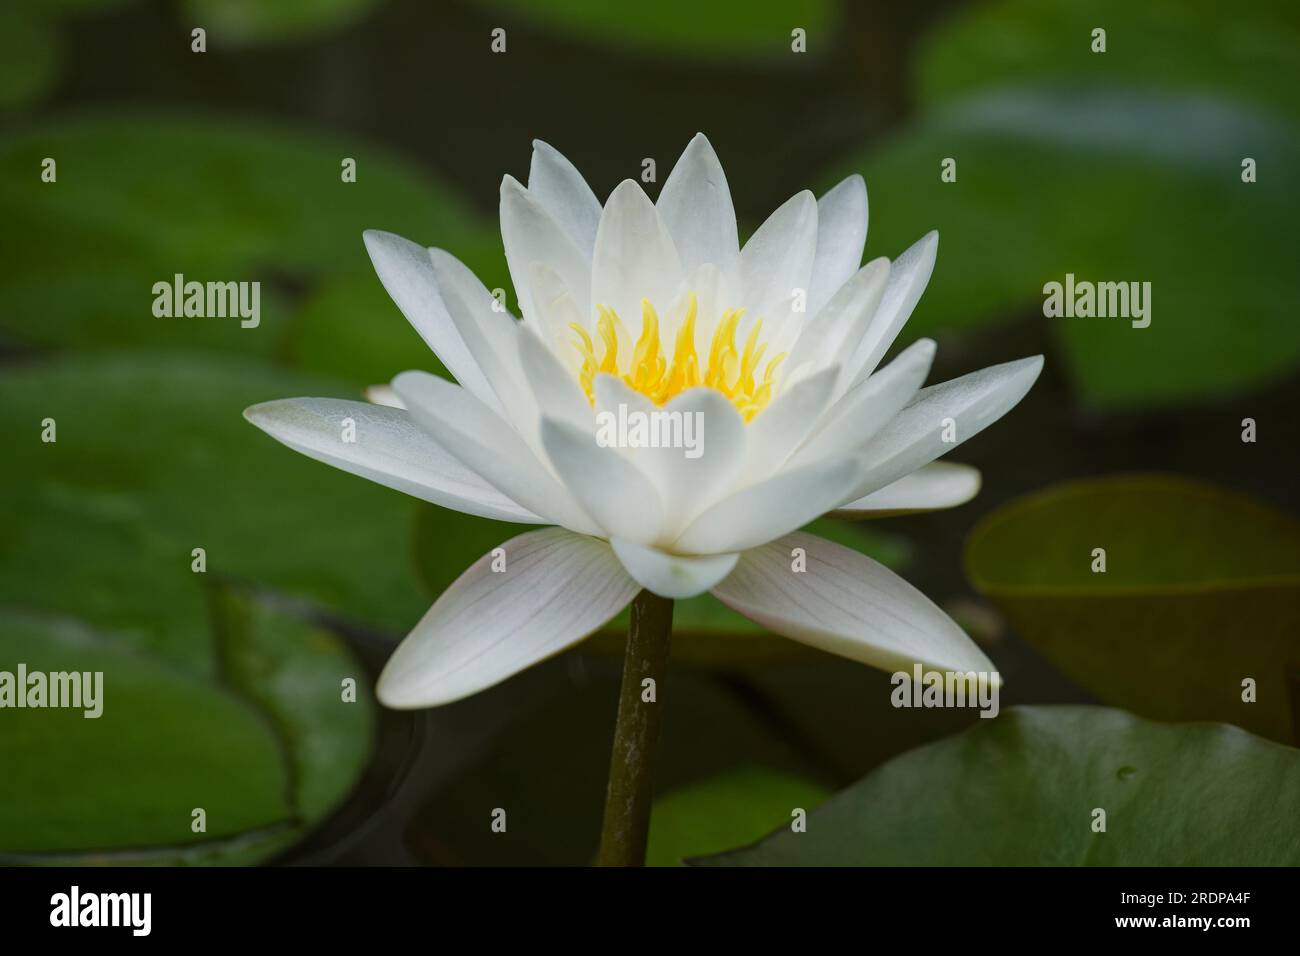 White water lily (Nymphaea alba) surrounded by leaves in the water of a pond. Stock Photo